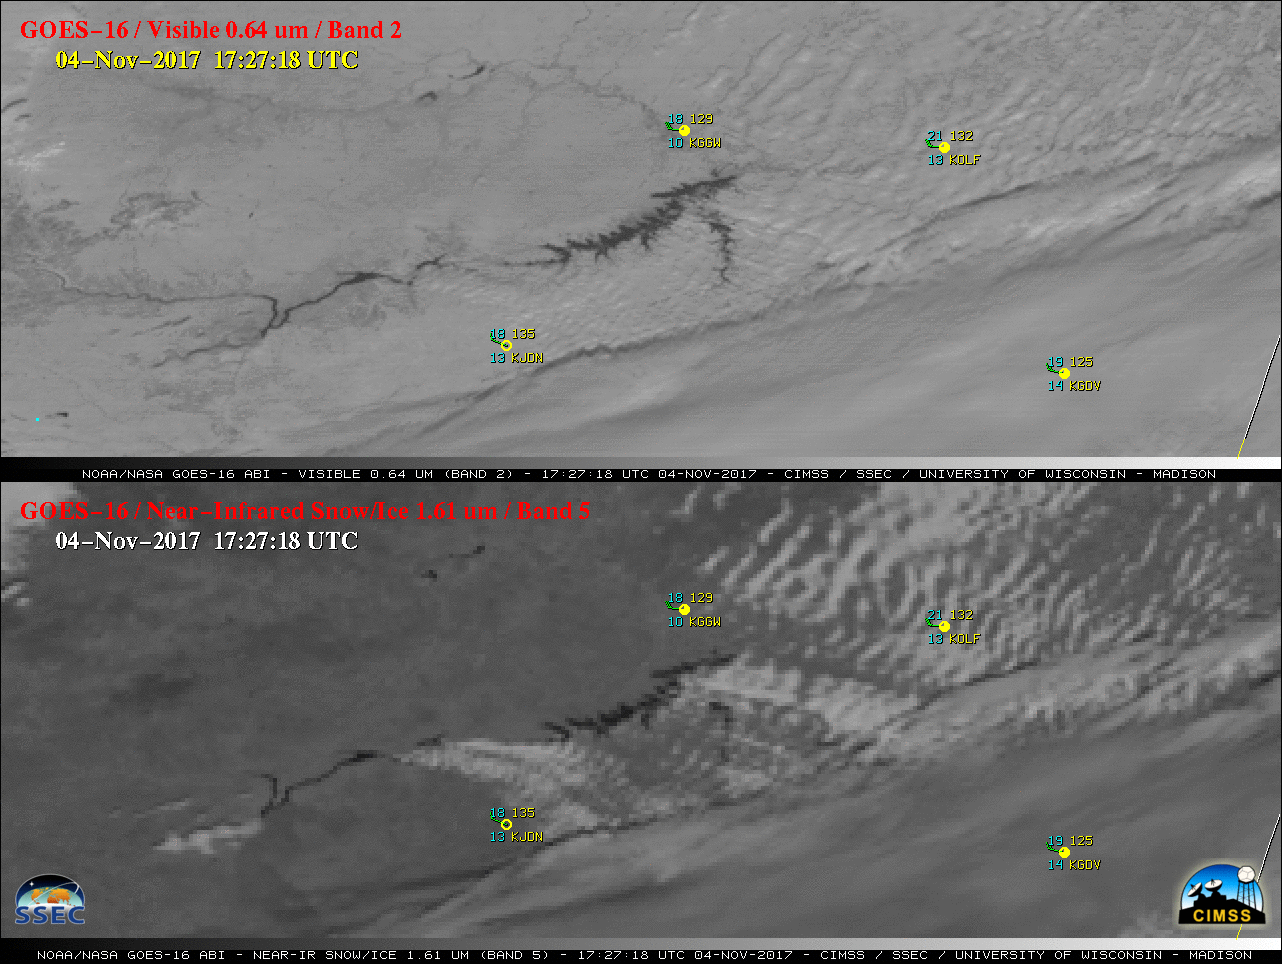 GOES-16 "Red" Visible (0.64 µm, top) and Near-Infrared "Snow/Ice" (1.61 µm, bottom) images, with hourly plots of surface observations [click to play MP4 animation]